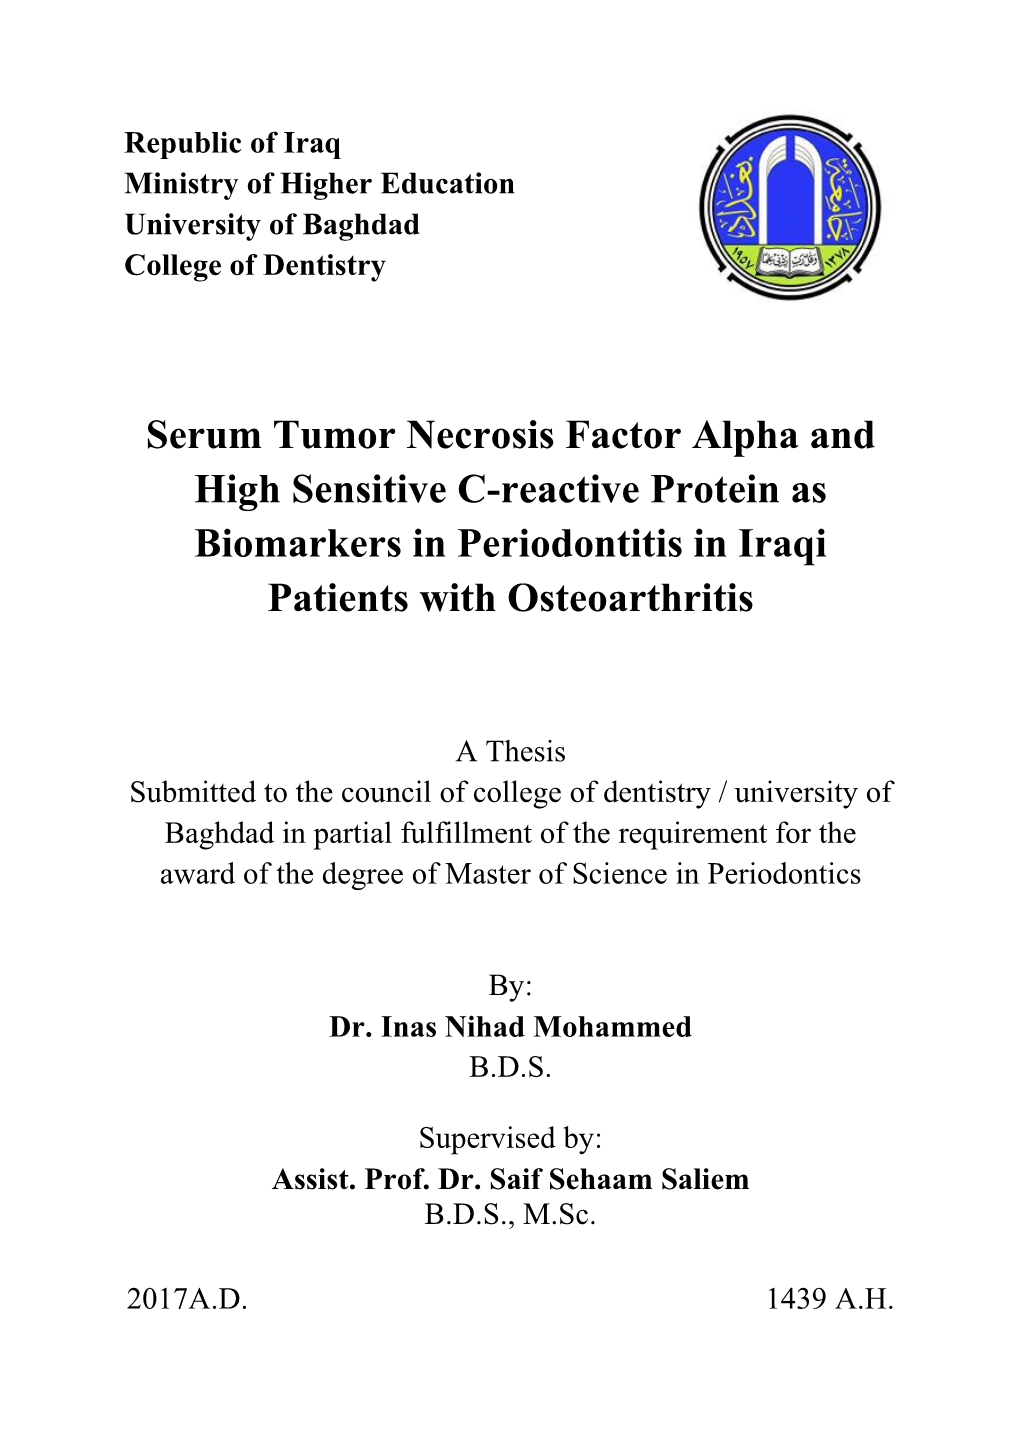 Serum Tumor Necrosis Factor Alpha and High Sensitive C-Reactive Protein As Biomarkers in Periodontitis in Iraqi Patients with Osteoarthritis